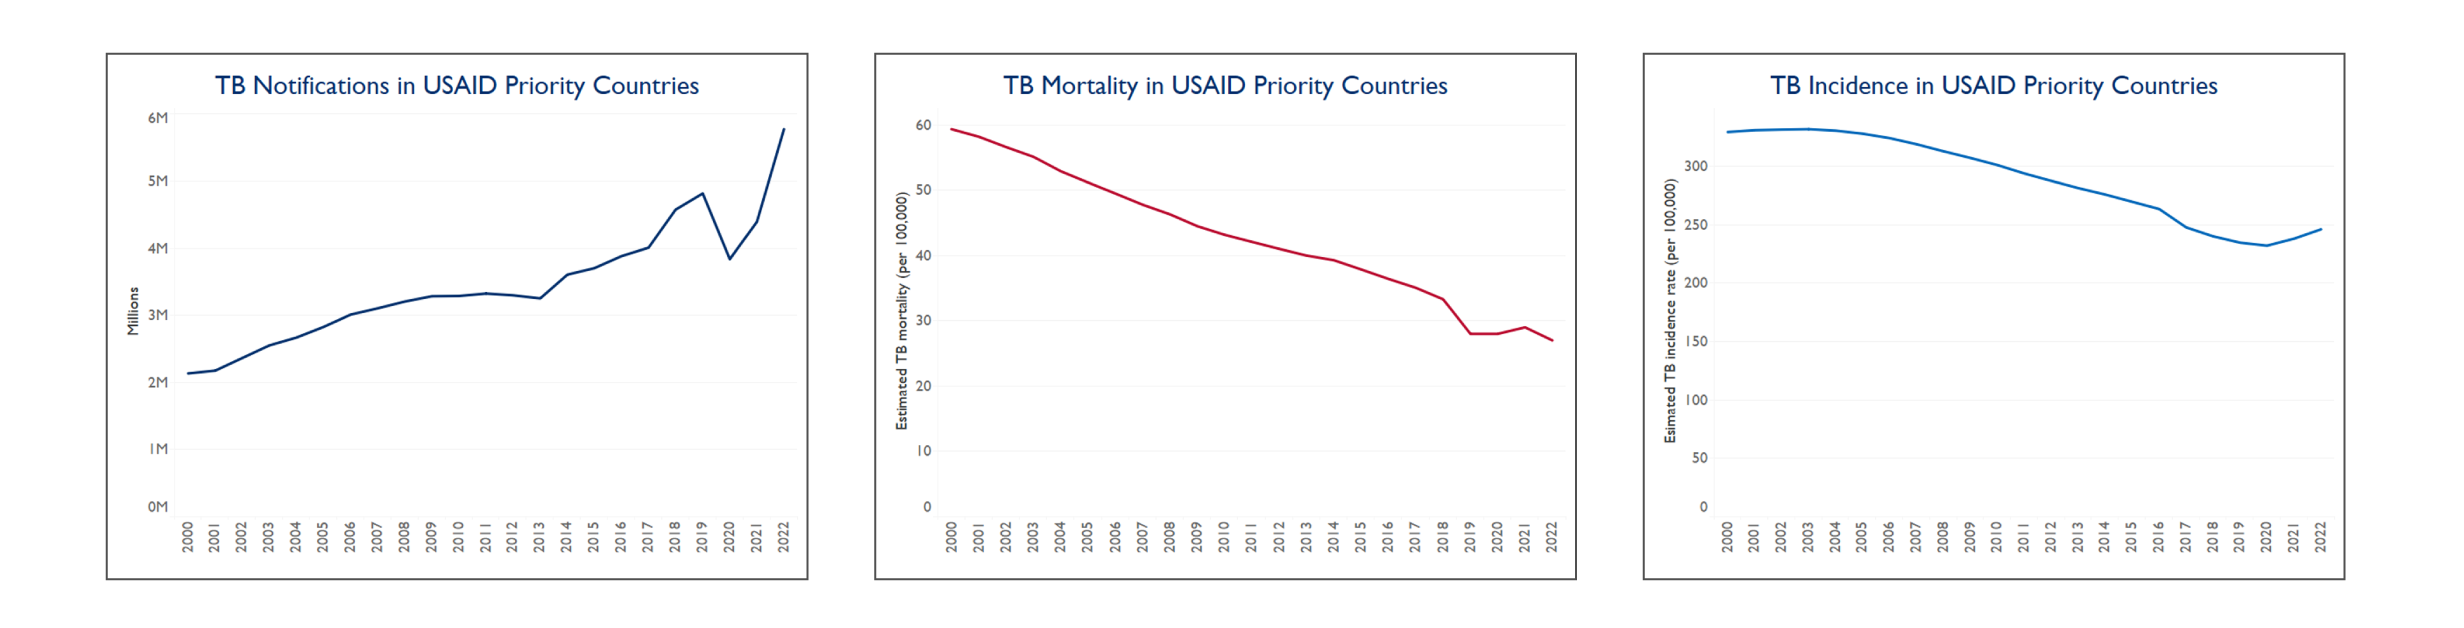 Regaining Lost Progress graphs | TB Notifications in USAID Priority Countries in millions, 2000-2022 | Estimated TB Mortality in USAID Priority Countries (per 10,000), 2000-2022 | Estimated TB Incidence in USAID Priority Countries (per 10,000), 2000-2022